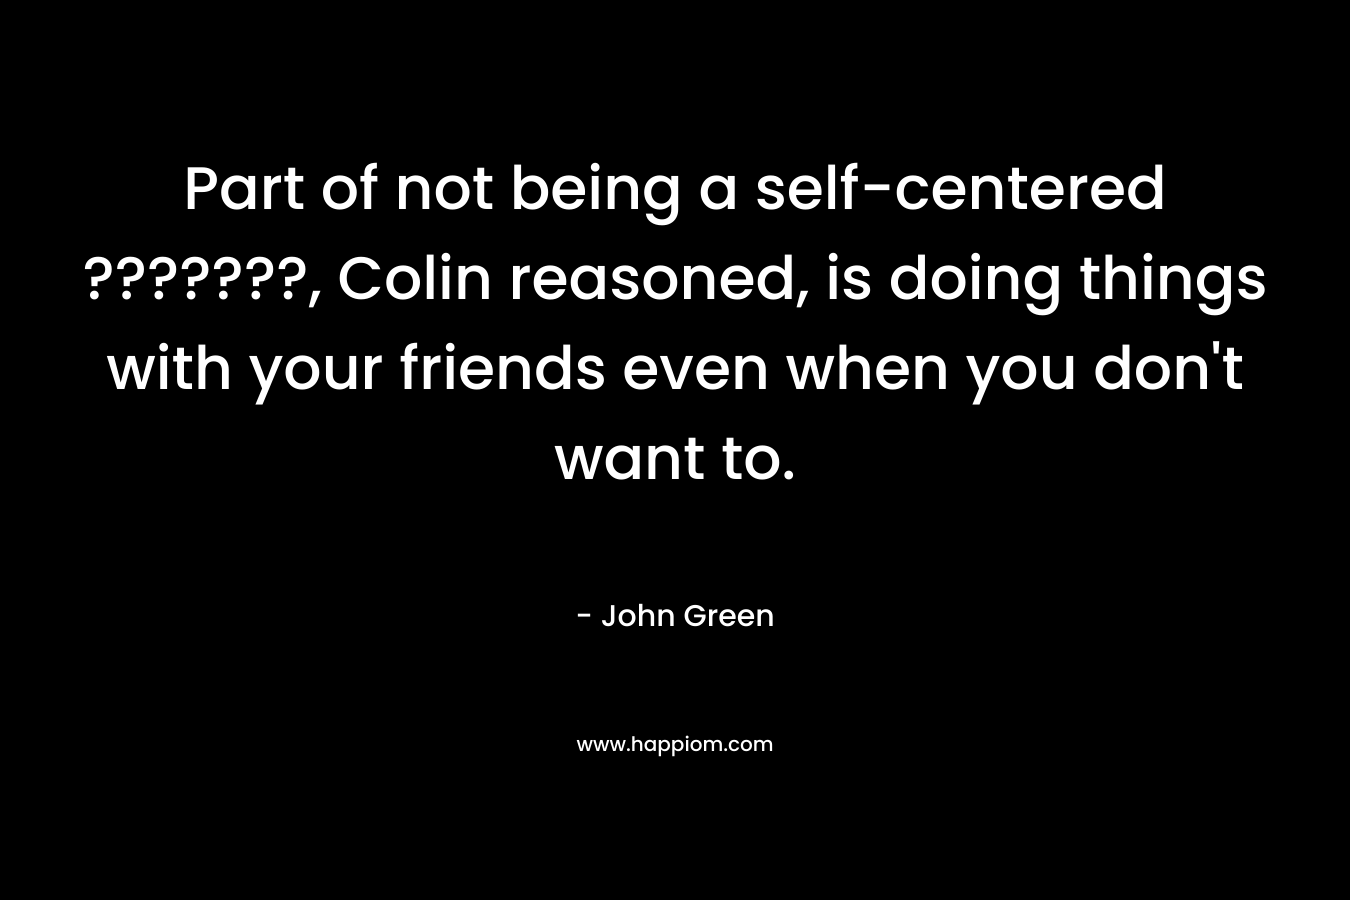 Part of not being a self-centered ???????, Colin reasoned, is doing things with your friends even when you don't want to.